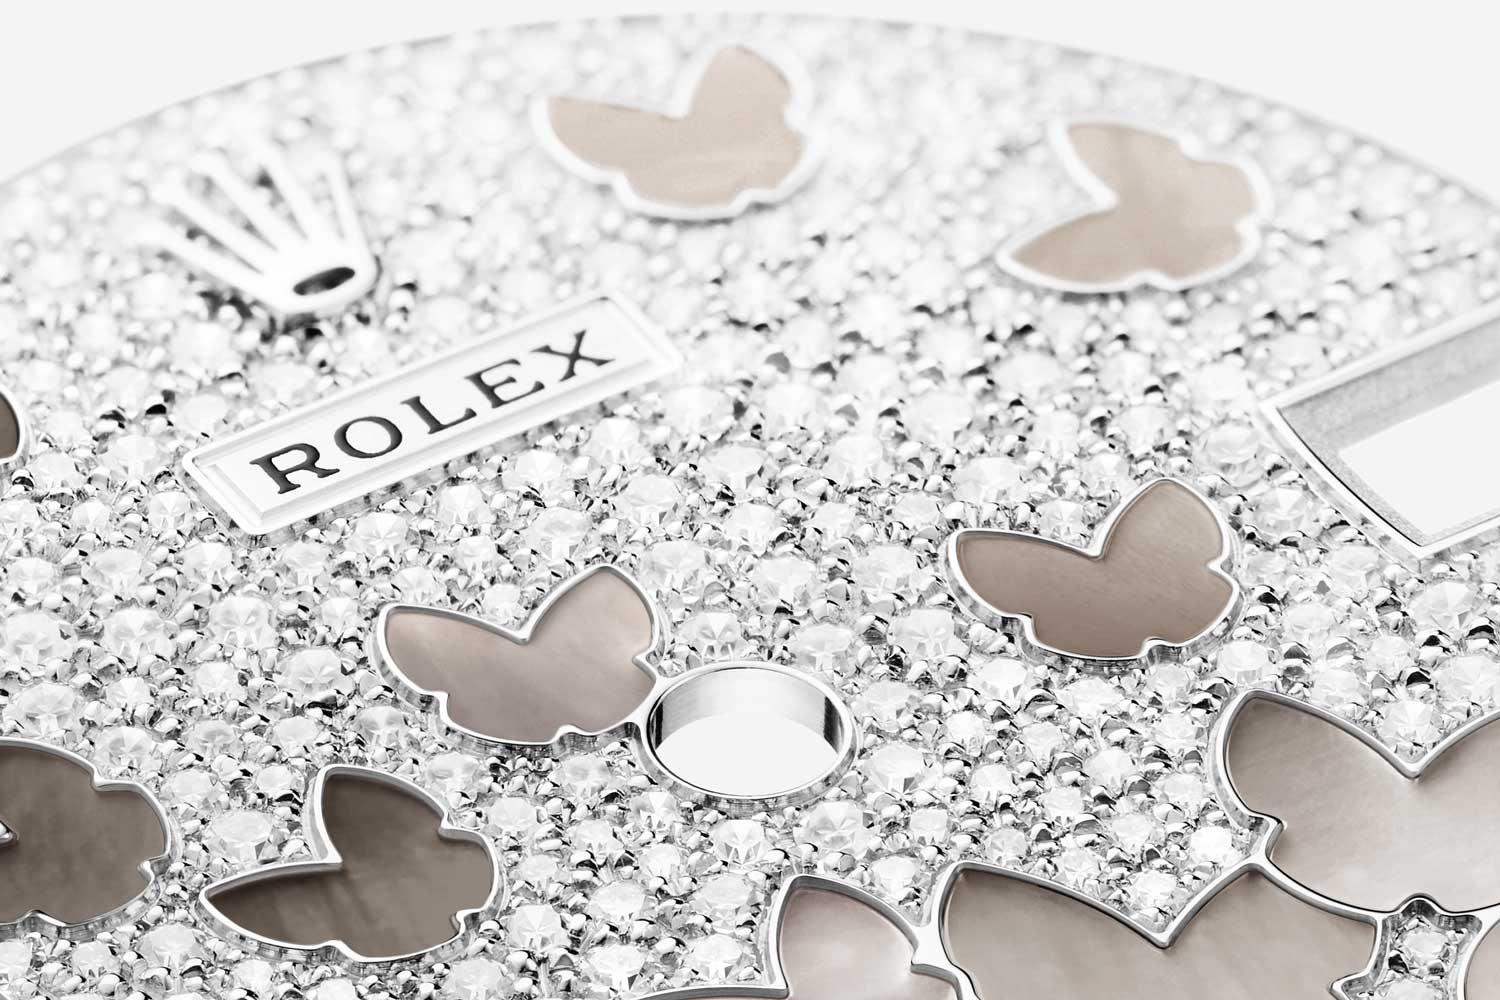 The exquisite art of gem-setting — Rolex dials are paved using only the very finest diamonds